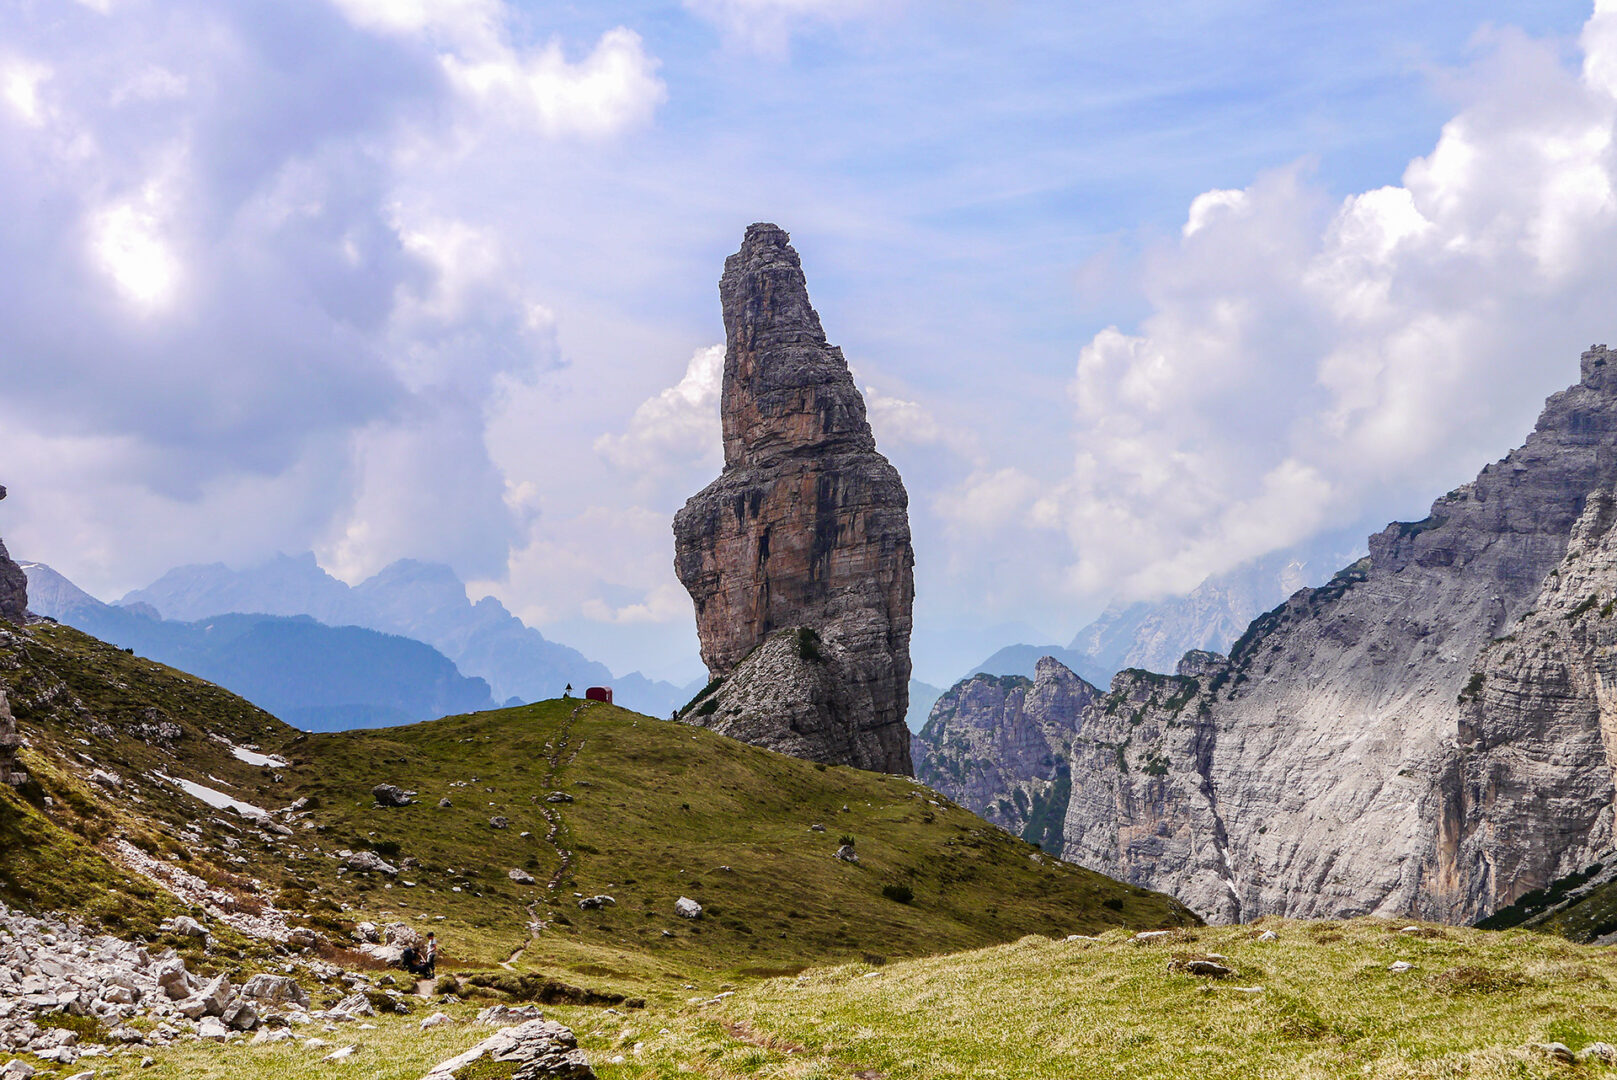 Mountain path leading to shelter with rocks towering beside in Dolomites Italy